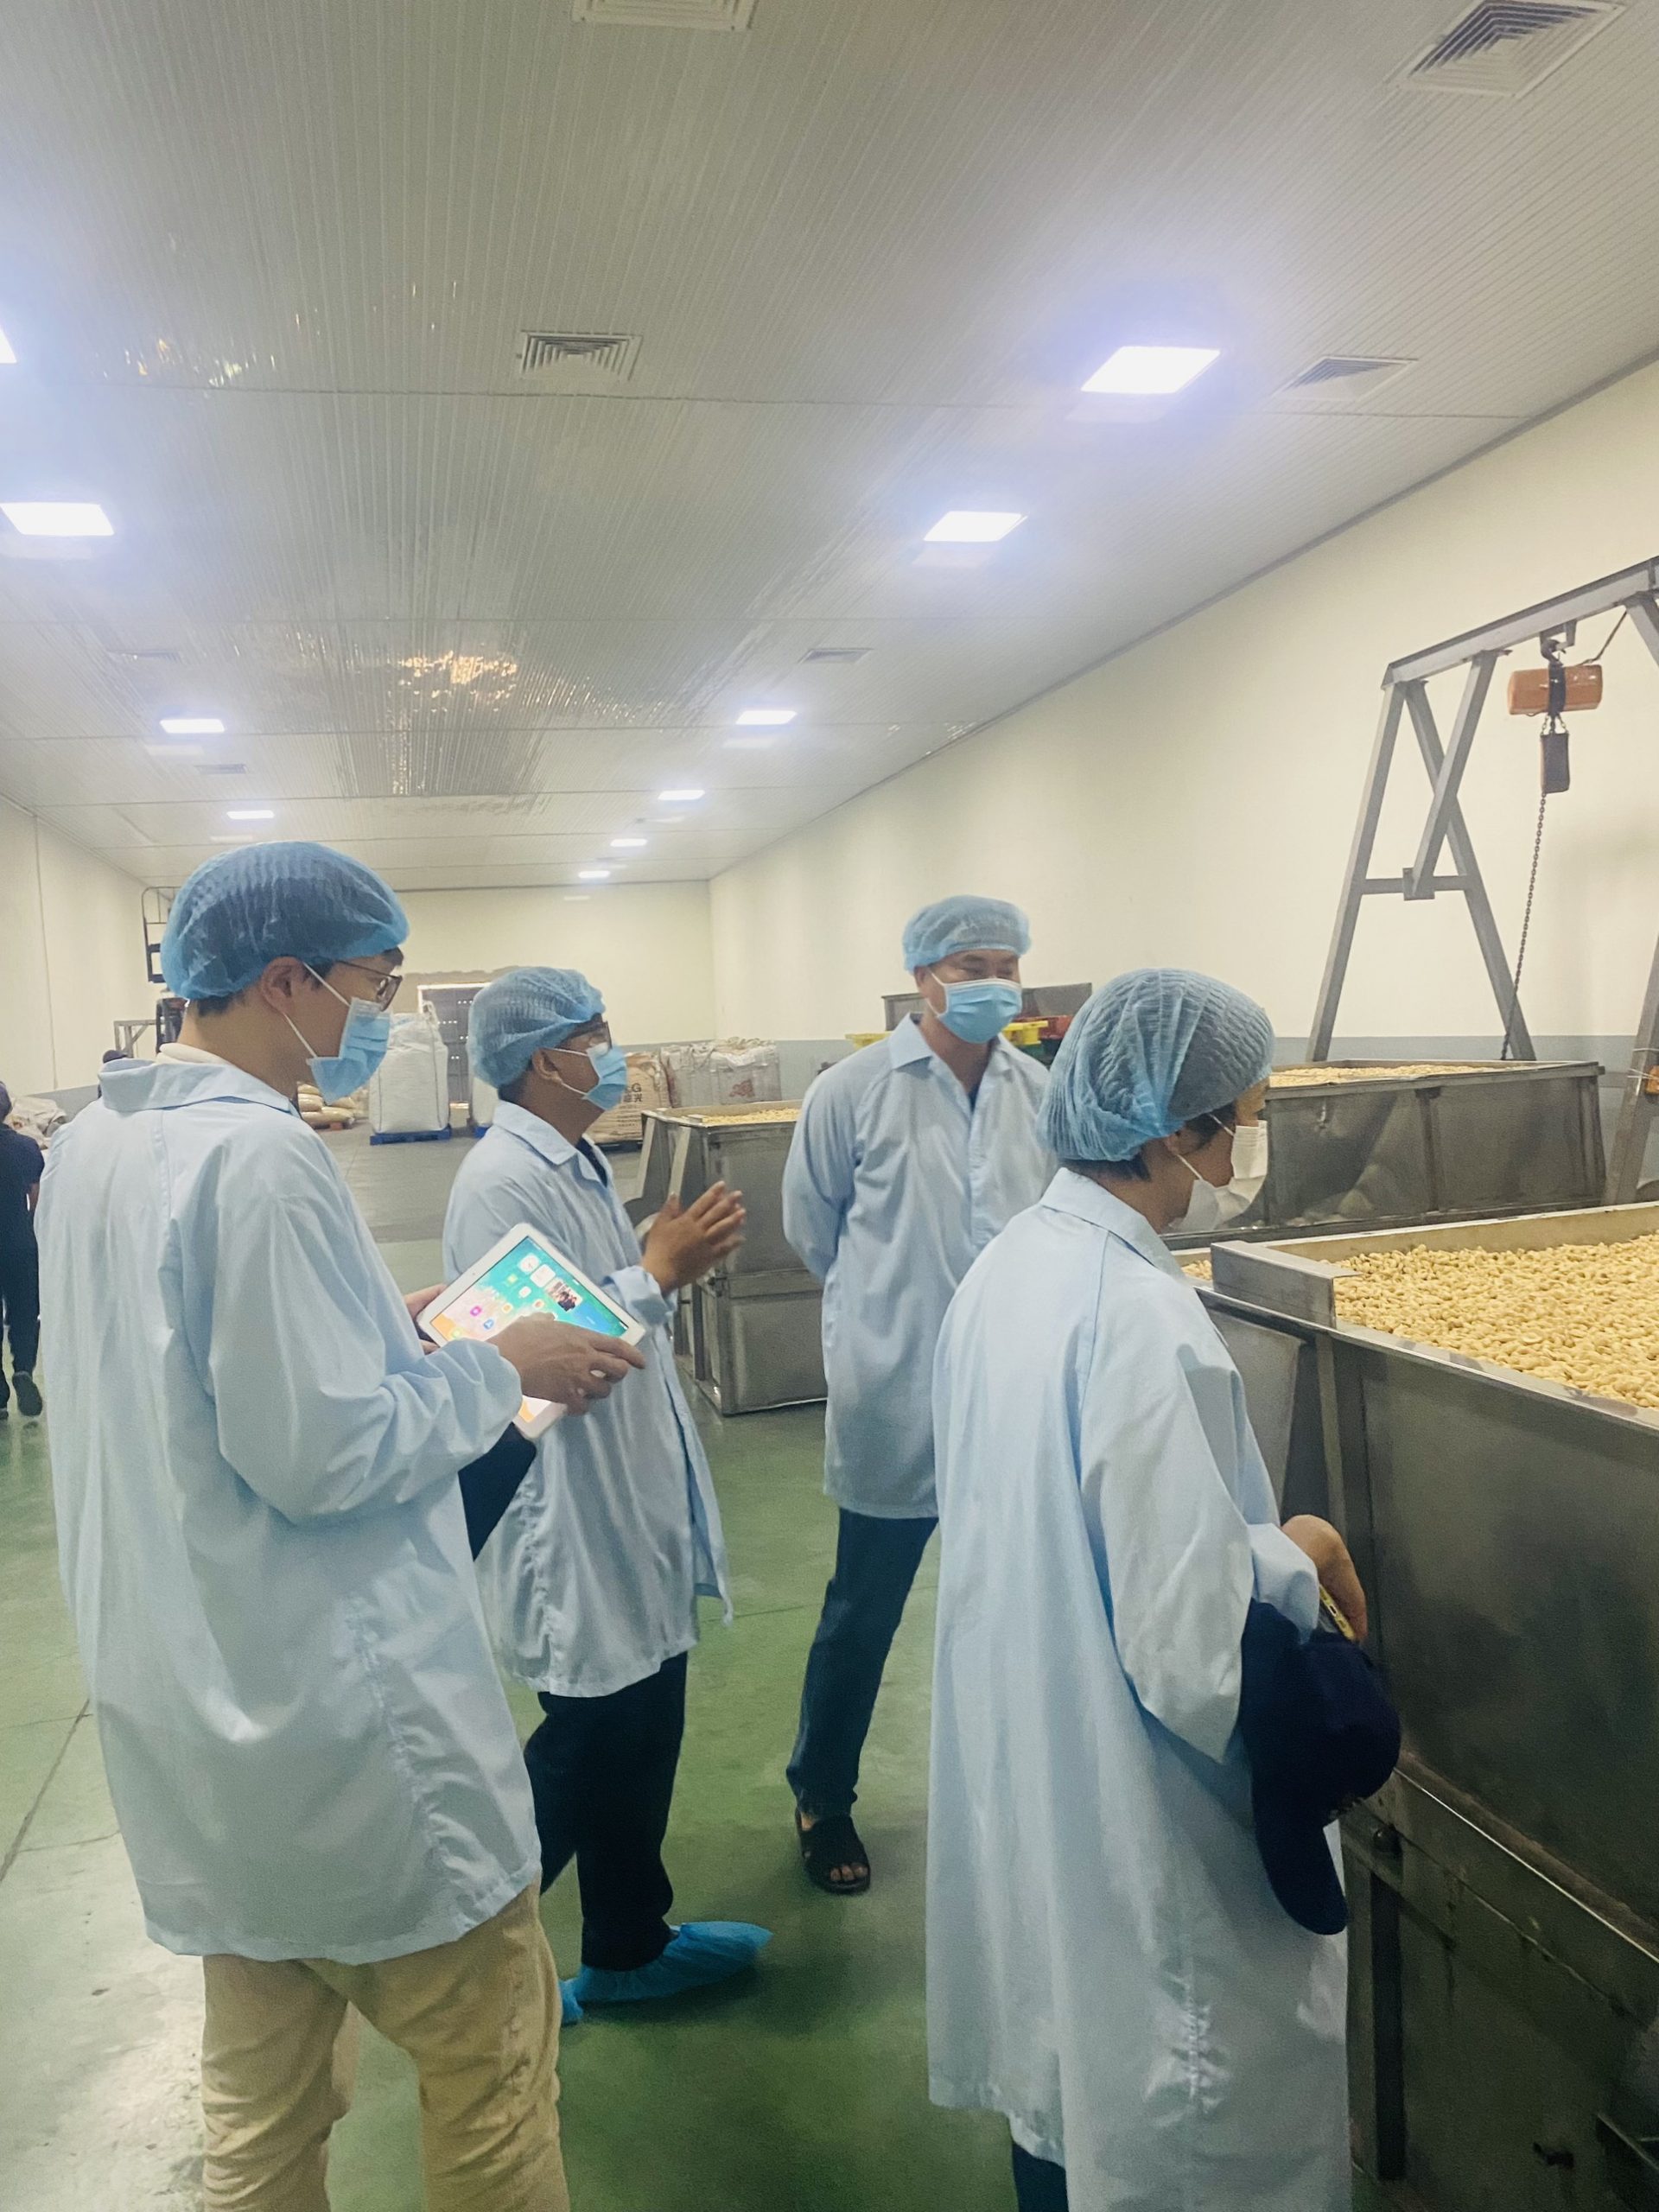 Exploring the Organic Cashew Nut Production Plant in Binh Duong: Blending Modernity and Sustainability